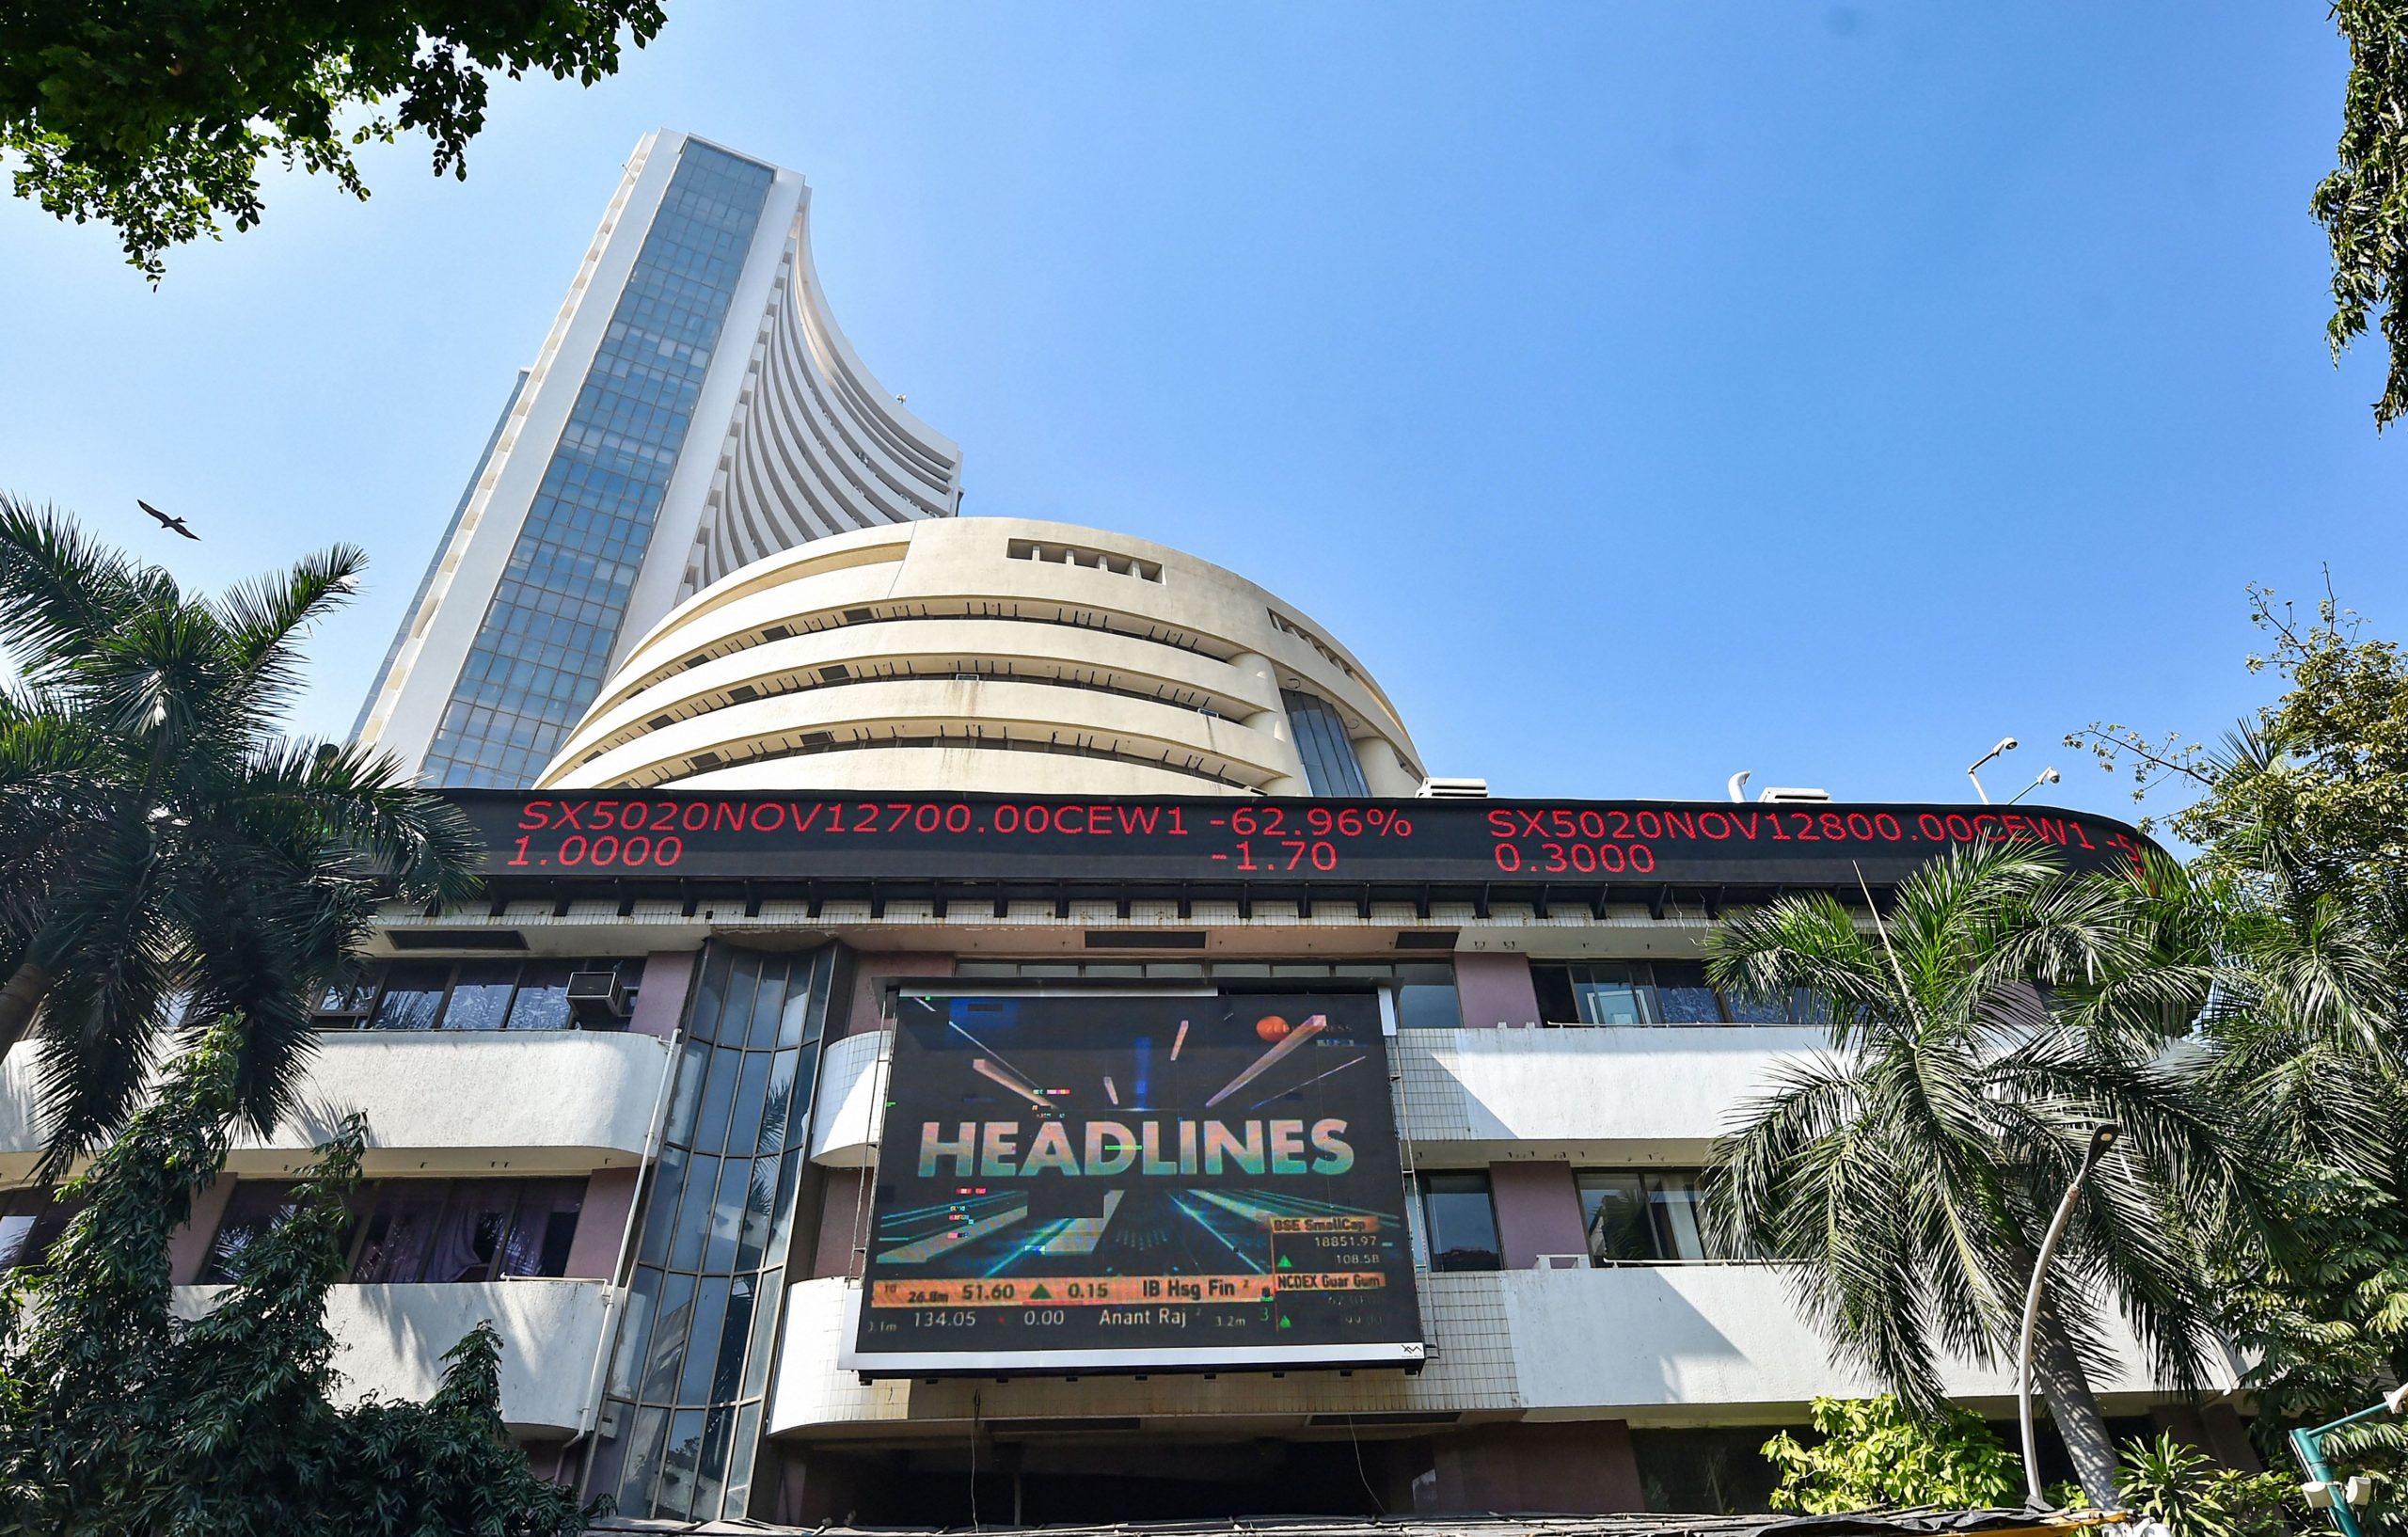 Trending Stocks: CIL, Infosys, Tata Steel, Hathway and others in news today